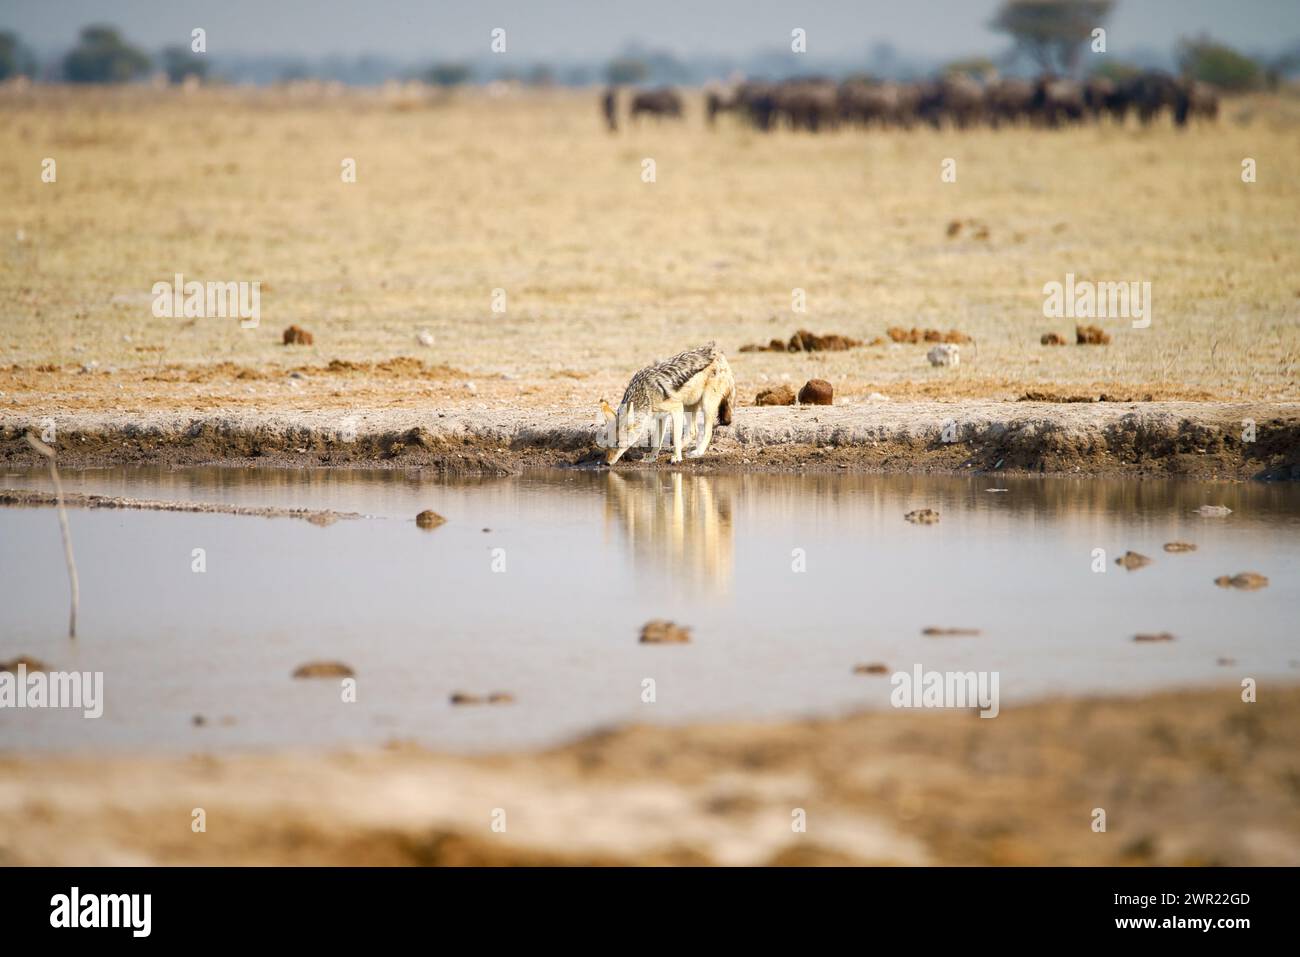 A black-backed jackal drinking from a water hole on the open plains in Africa with a herd of animals in the background. Stock Photo